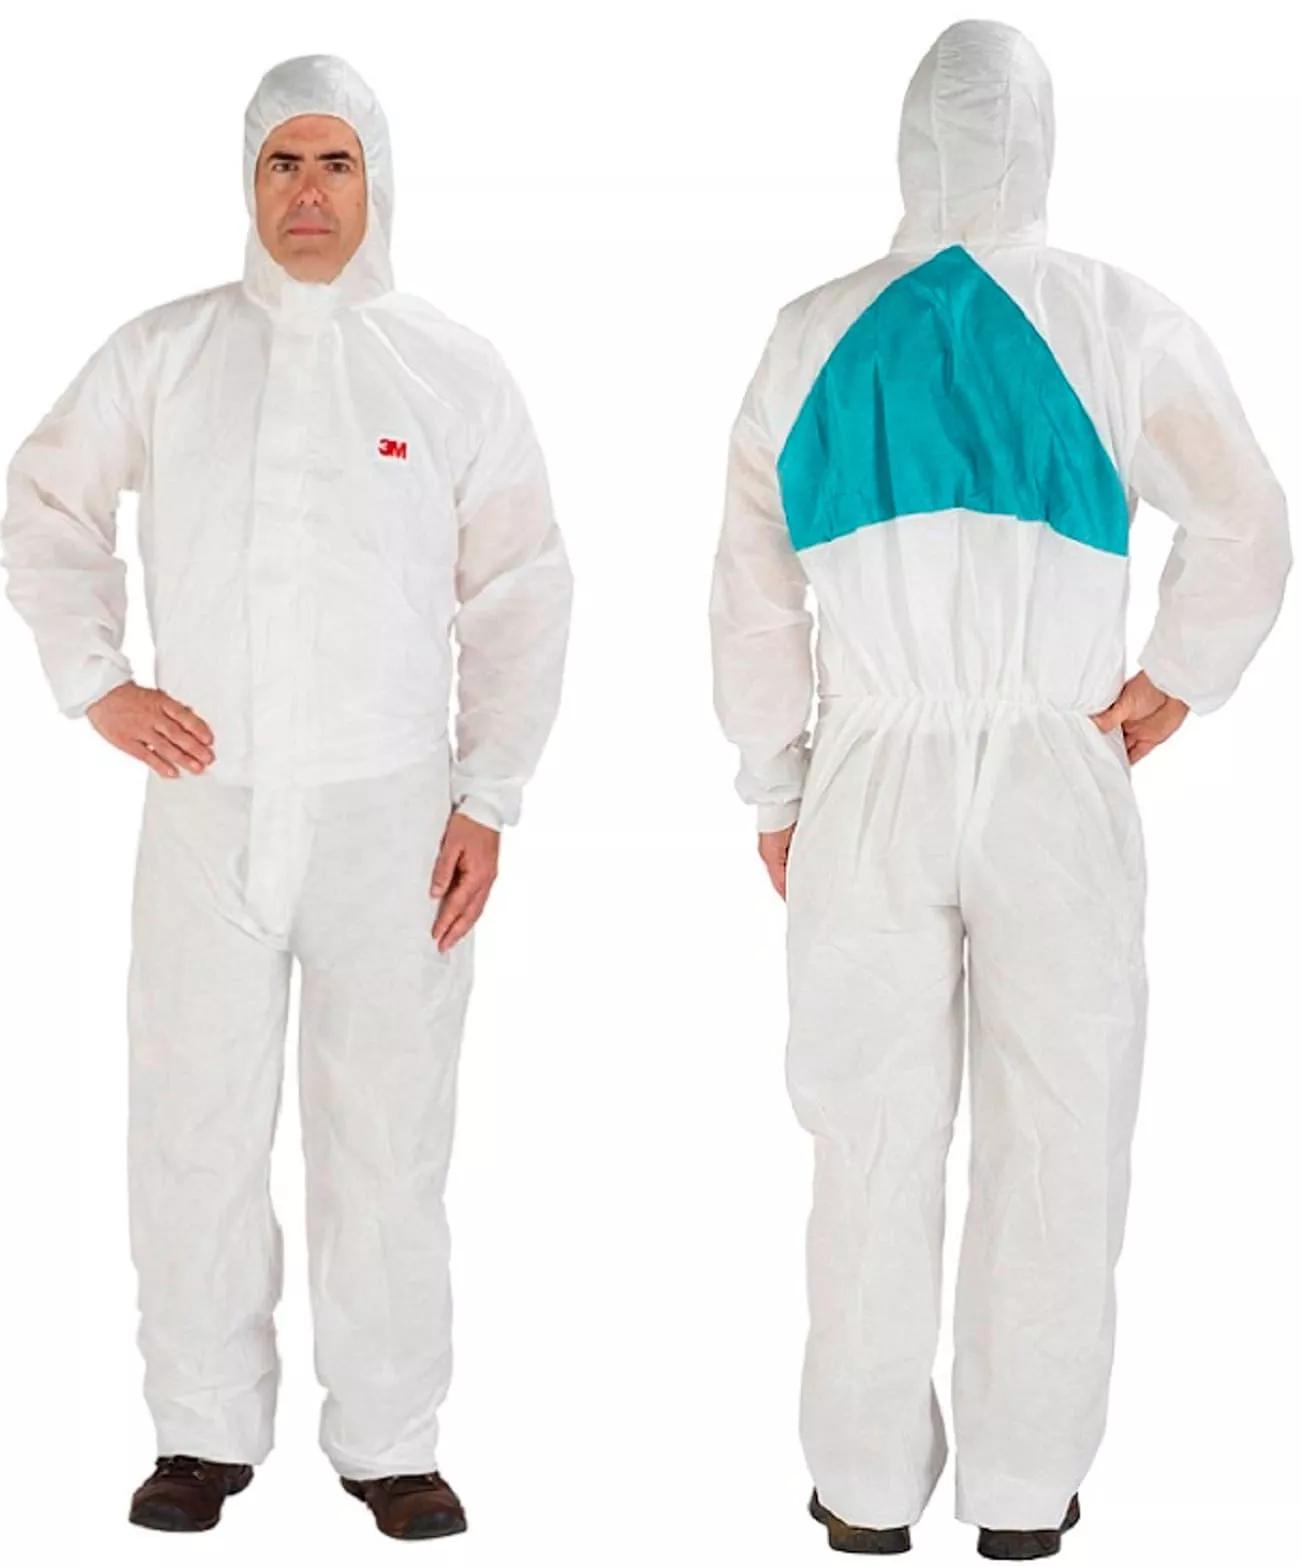 3M™ Disposable Protective Coverall 4520-M, White/Green, Type 5/6, 20
EA/Case